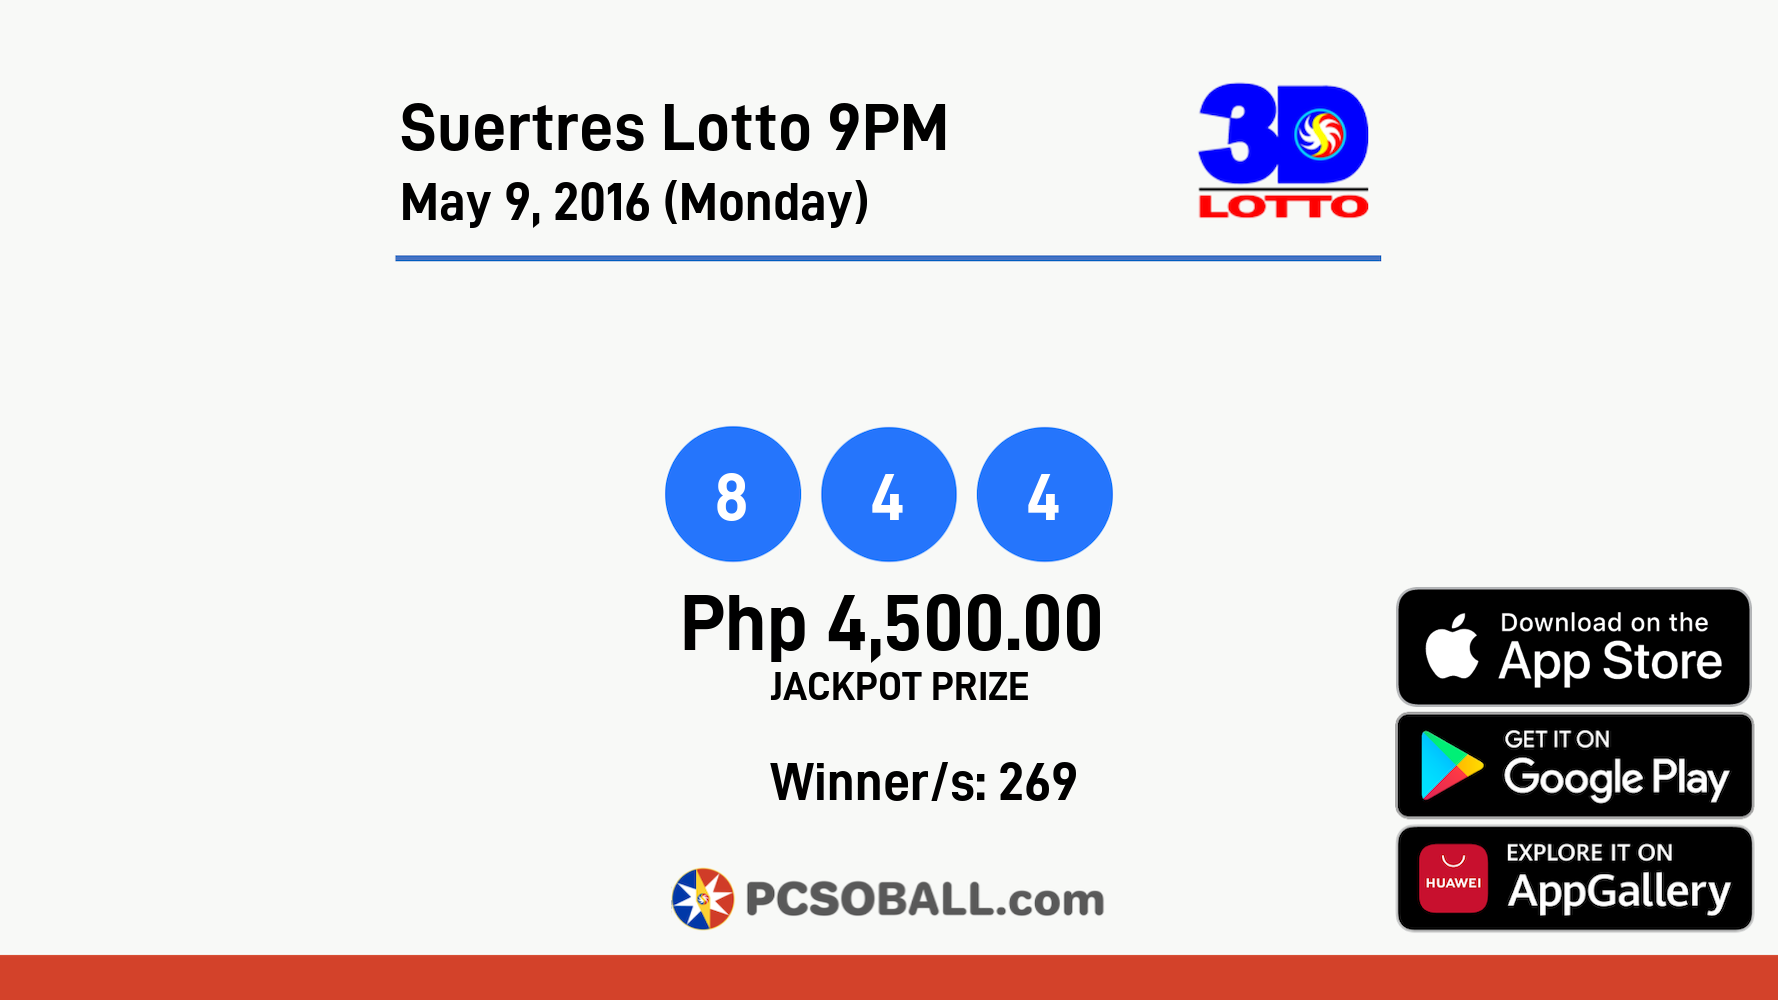 Suertres Lotto 9PM May 9, 2016 (Monday) Result